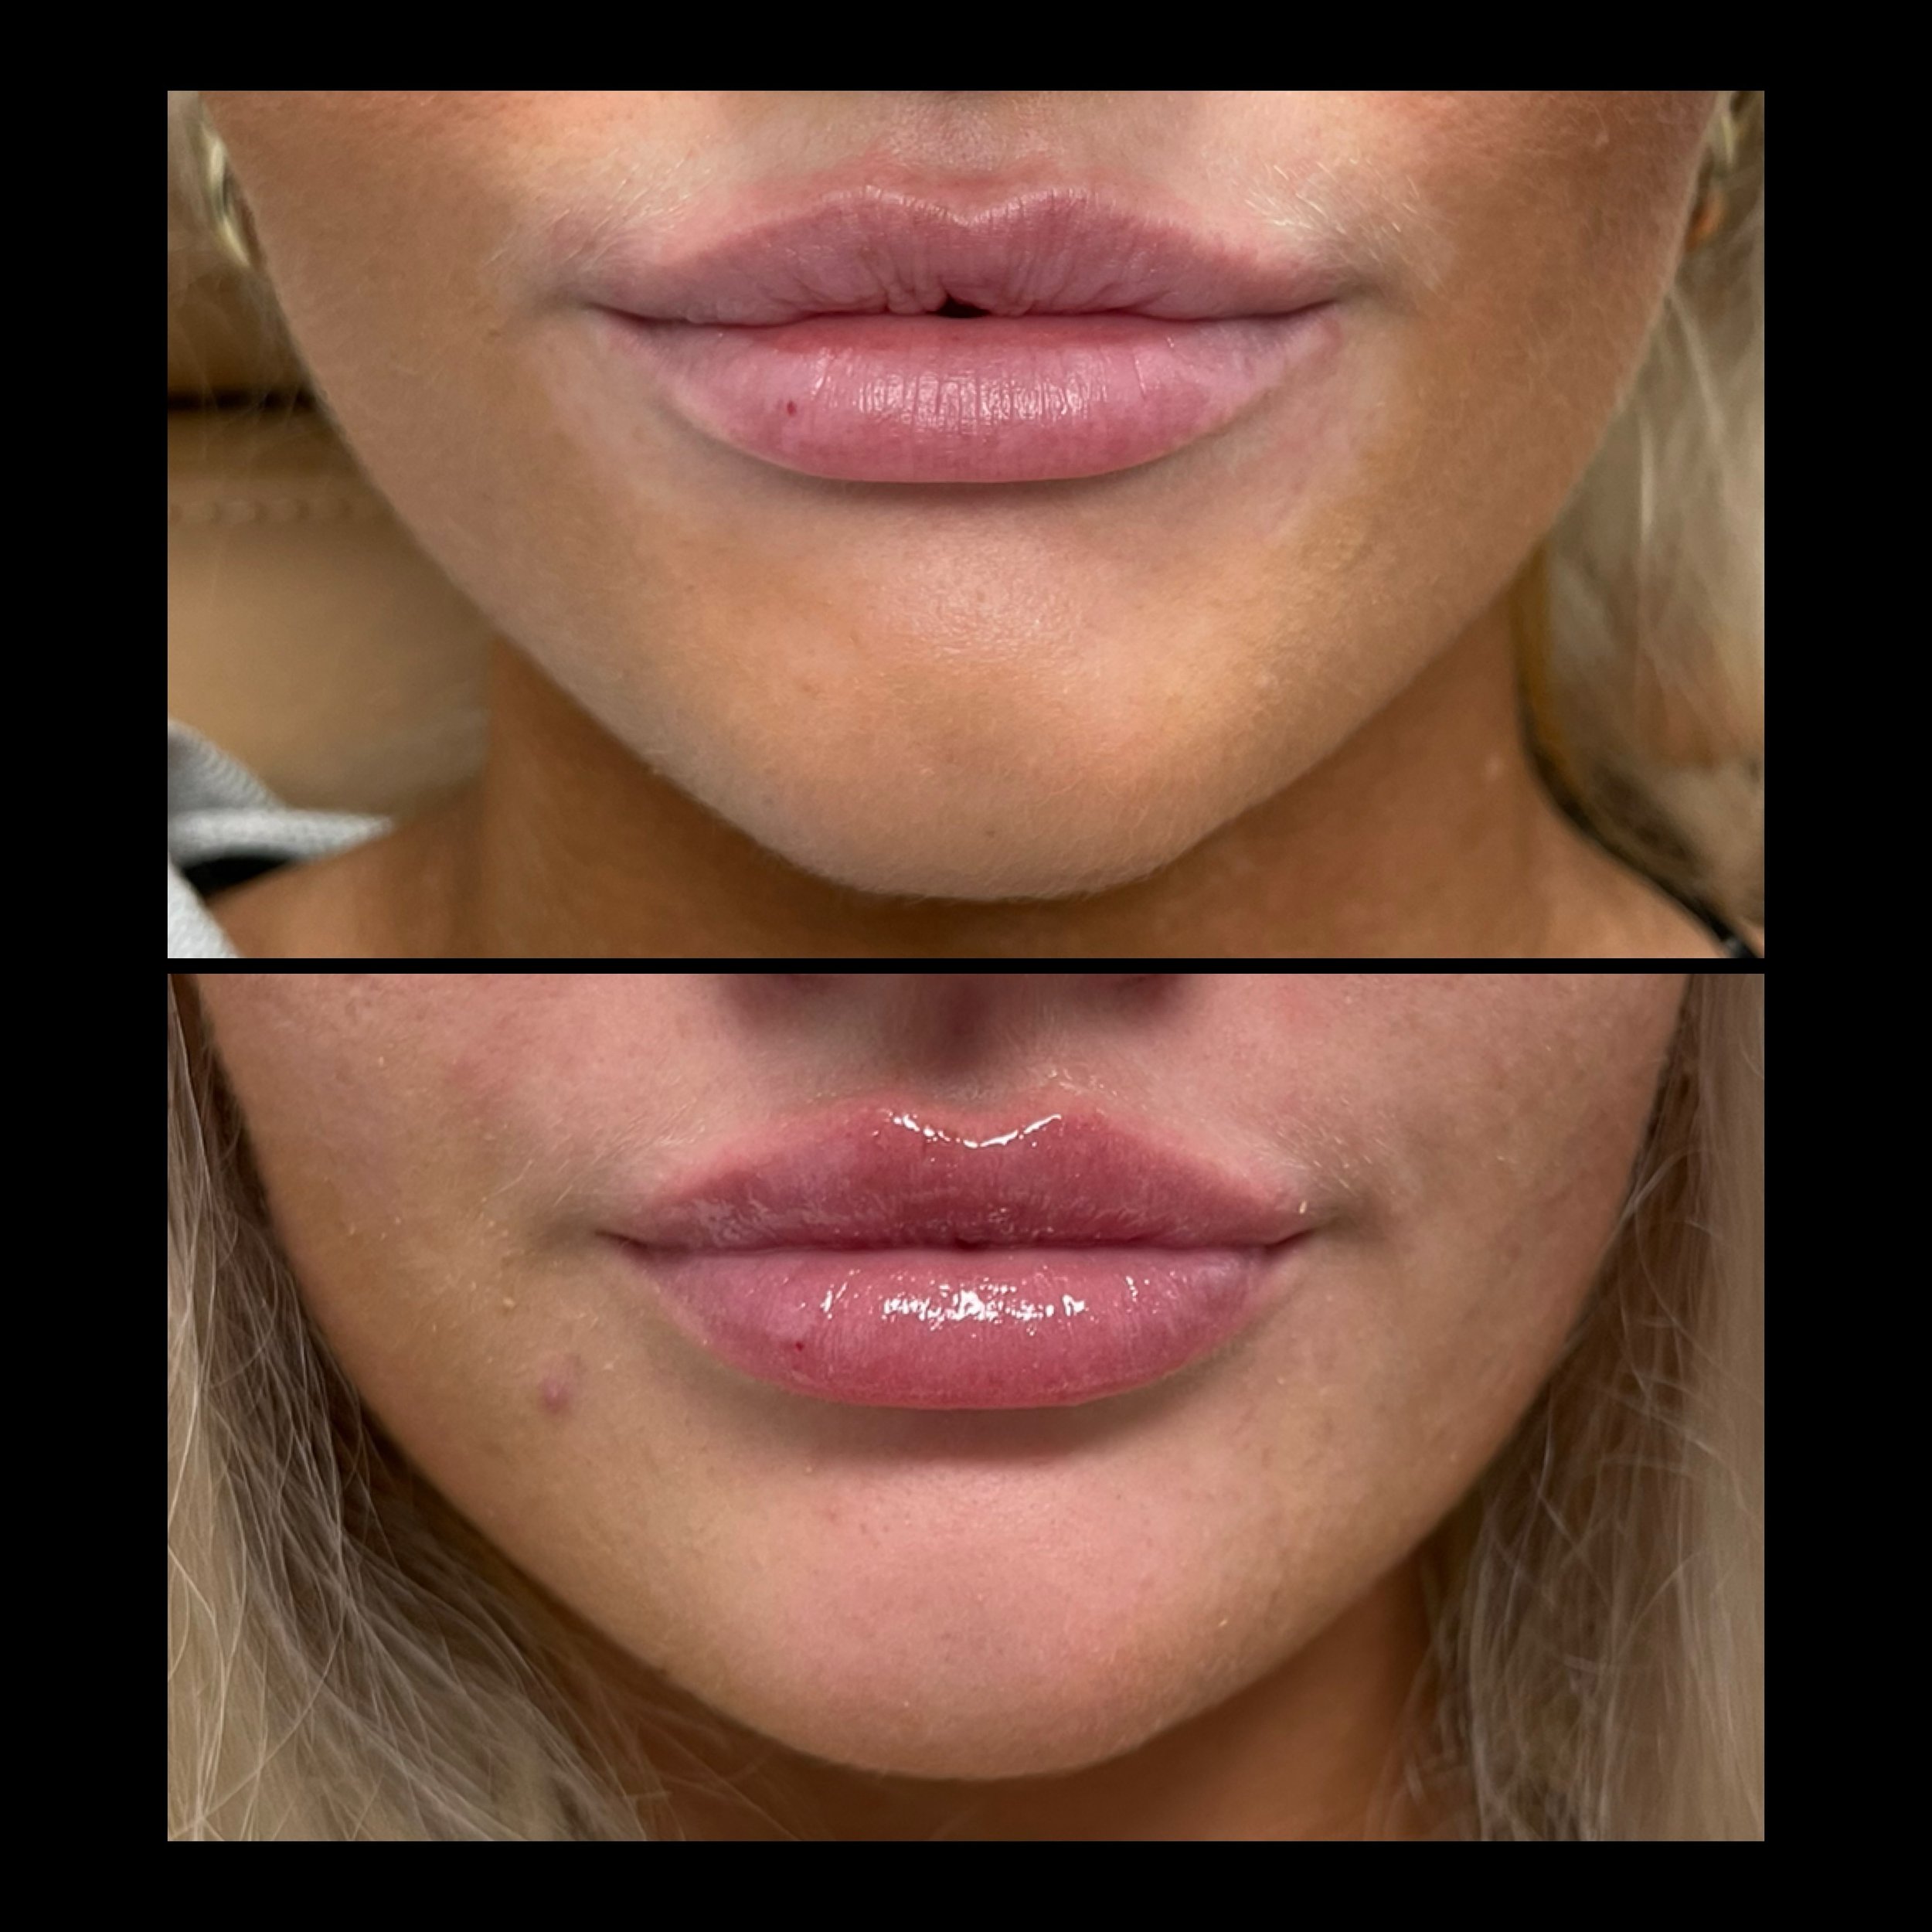 Before⇢2 weeks after 👄

We got those borders nice and sharp &amp; added a little hydration just in time for summer! ☀️

Reminder: This week &amp; next week I&rsquo;m offering $50 off ALL services! (Botox/dysport/jeuveau, filler, chemical peels and m